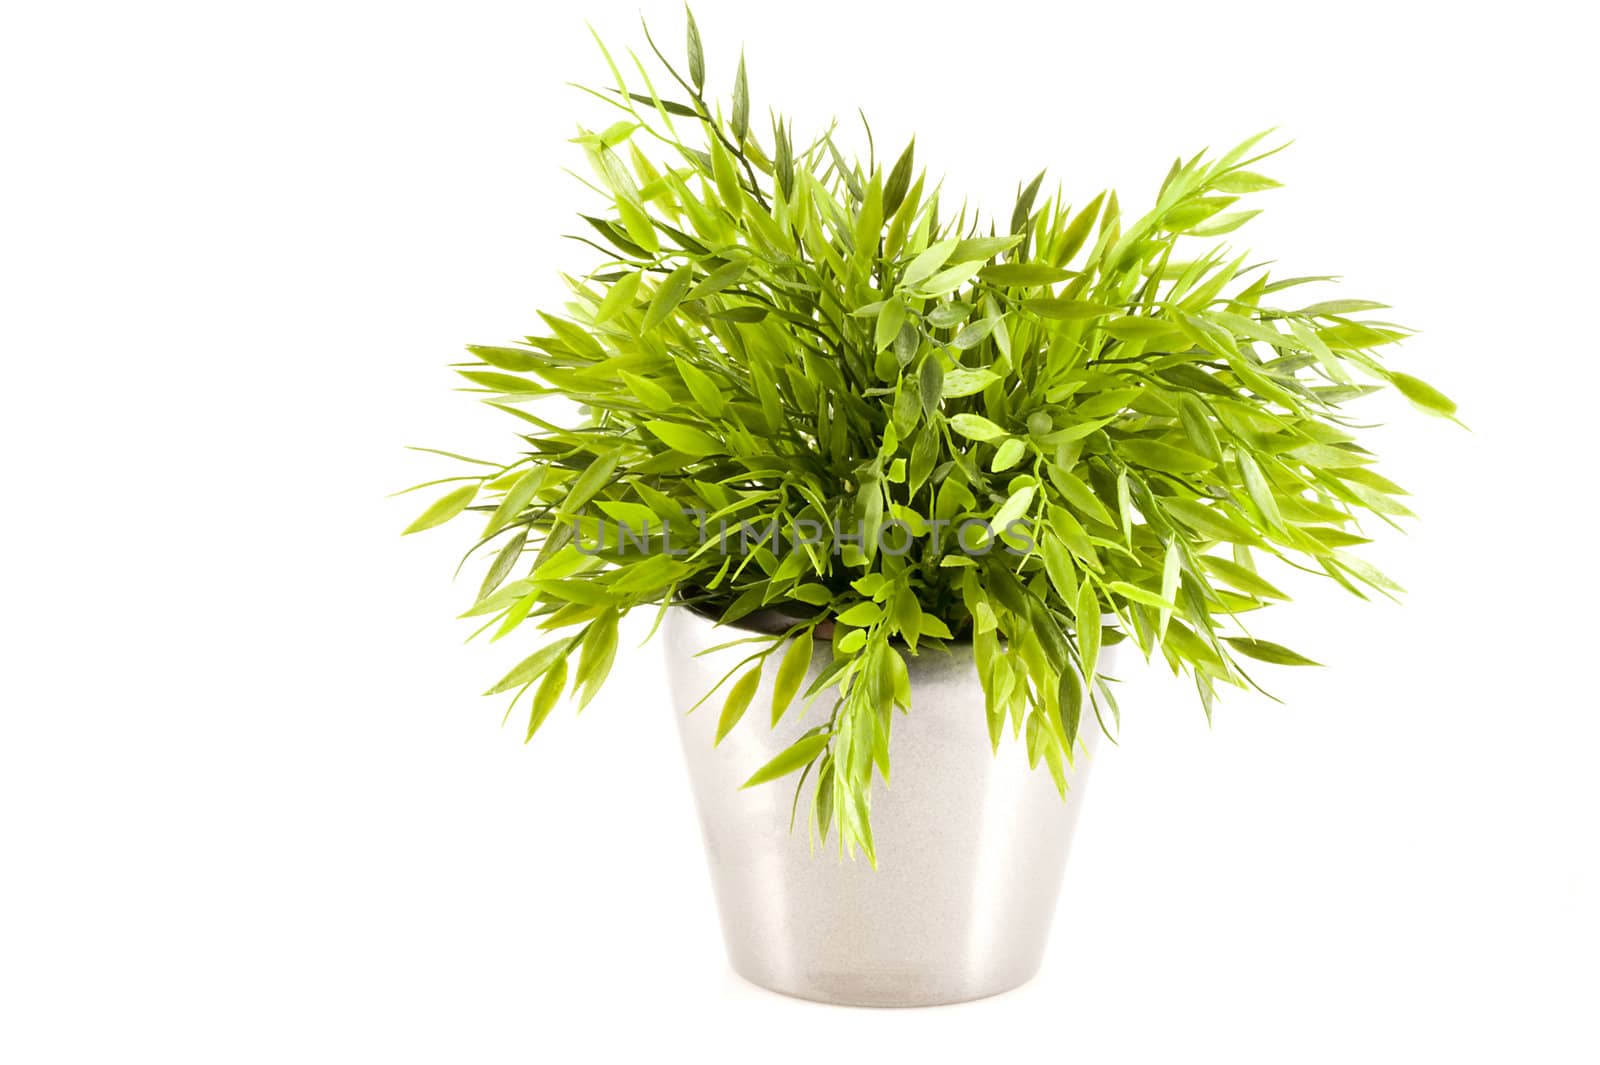 Green fake plant in silver pot on a white background.